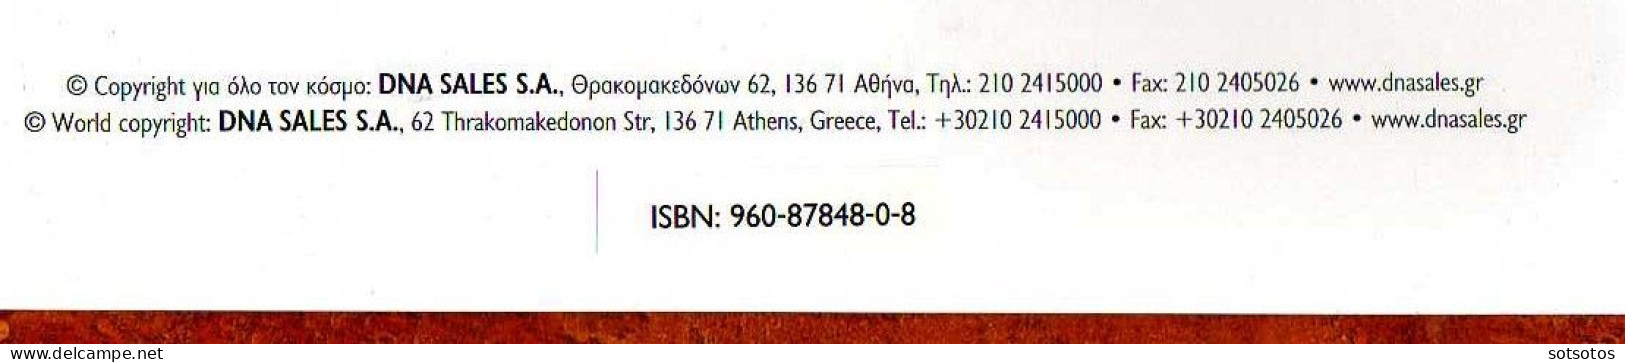 Athens Olympiads 1896-2004